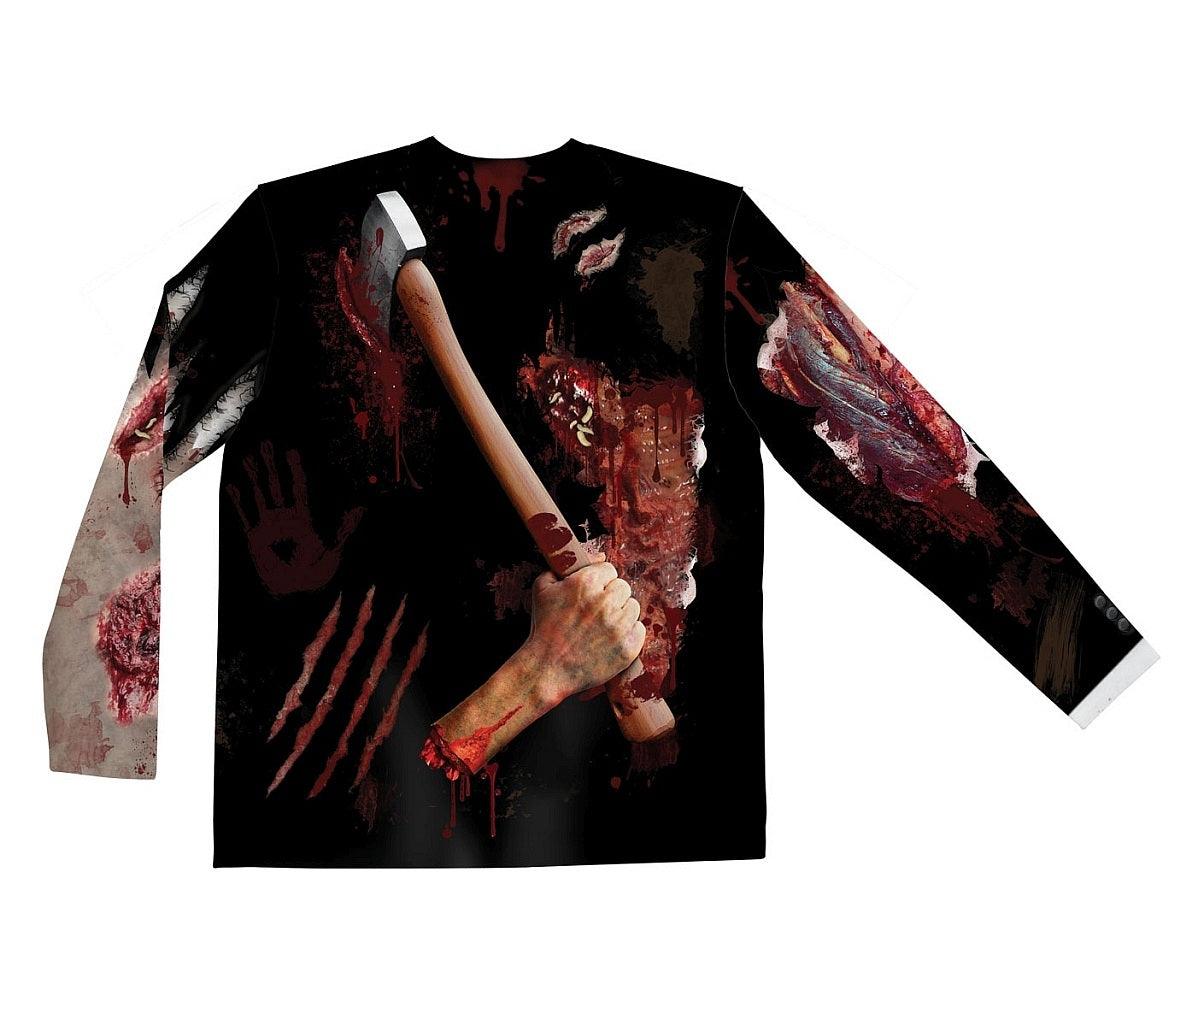 Faux Real ZOMBIE GROOM Shirt - Flyclothing LLC